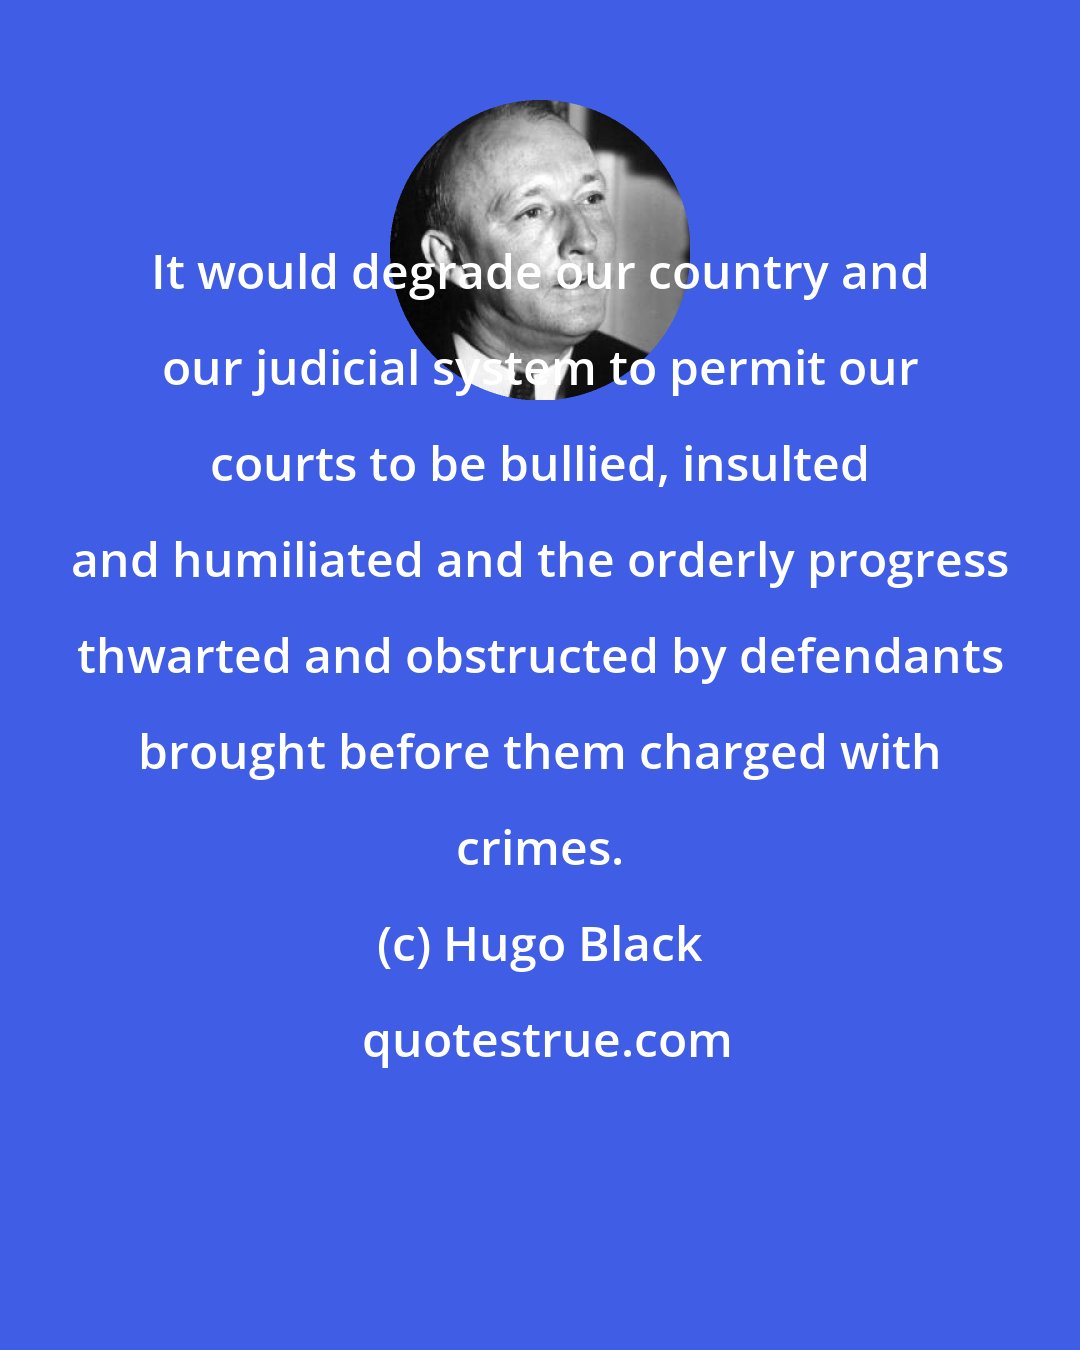 Hugo Black: It would degrade our country and our judicial system to permit our courts to be bullied, insulted and humiliated and the orderly progress thwarted and obstructed by defendants brought before them charged with crimes.